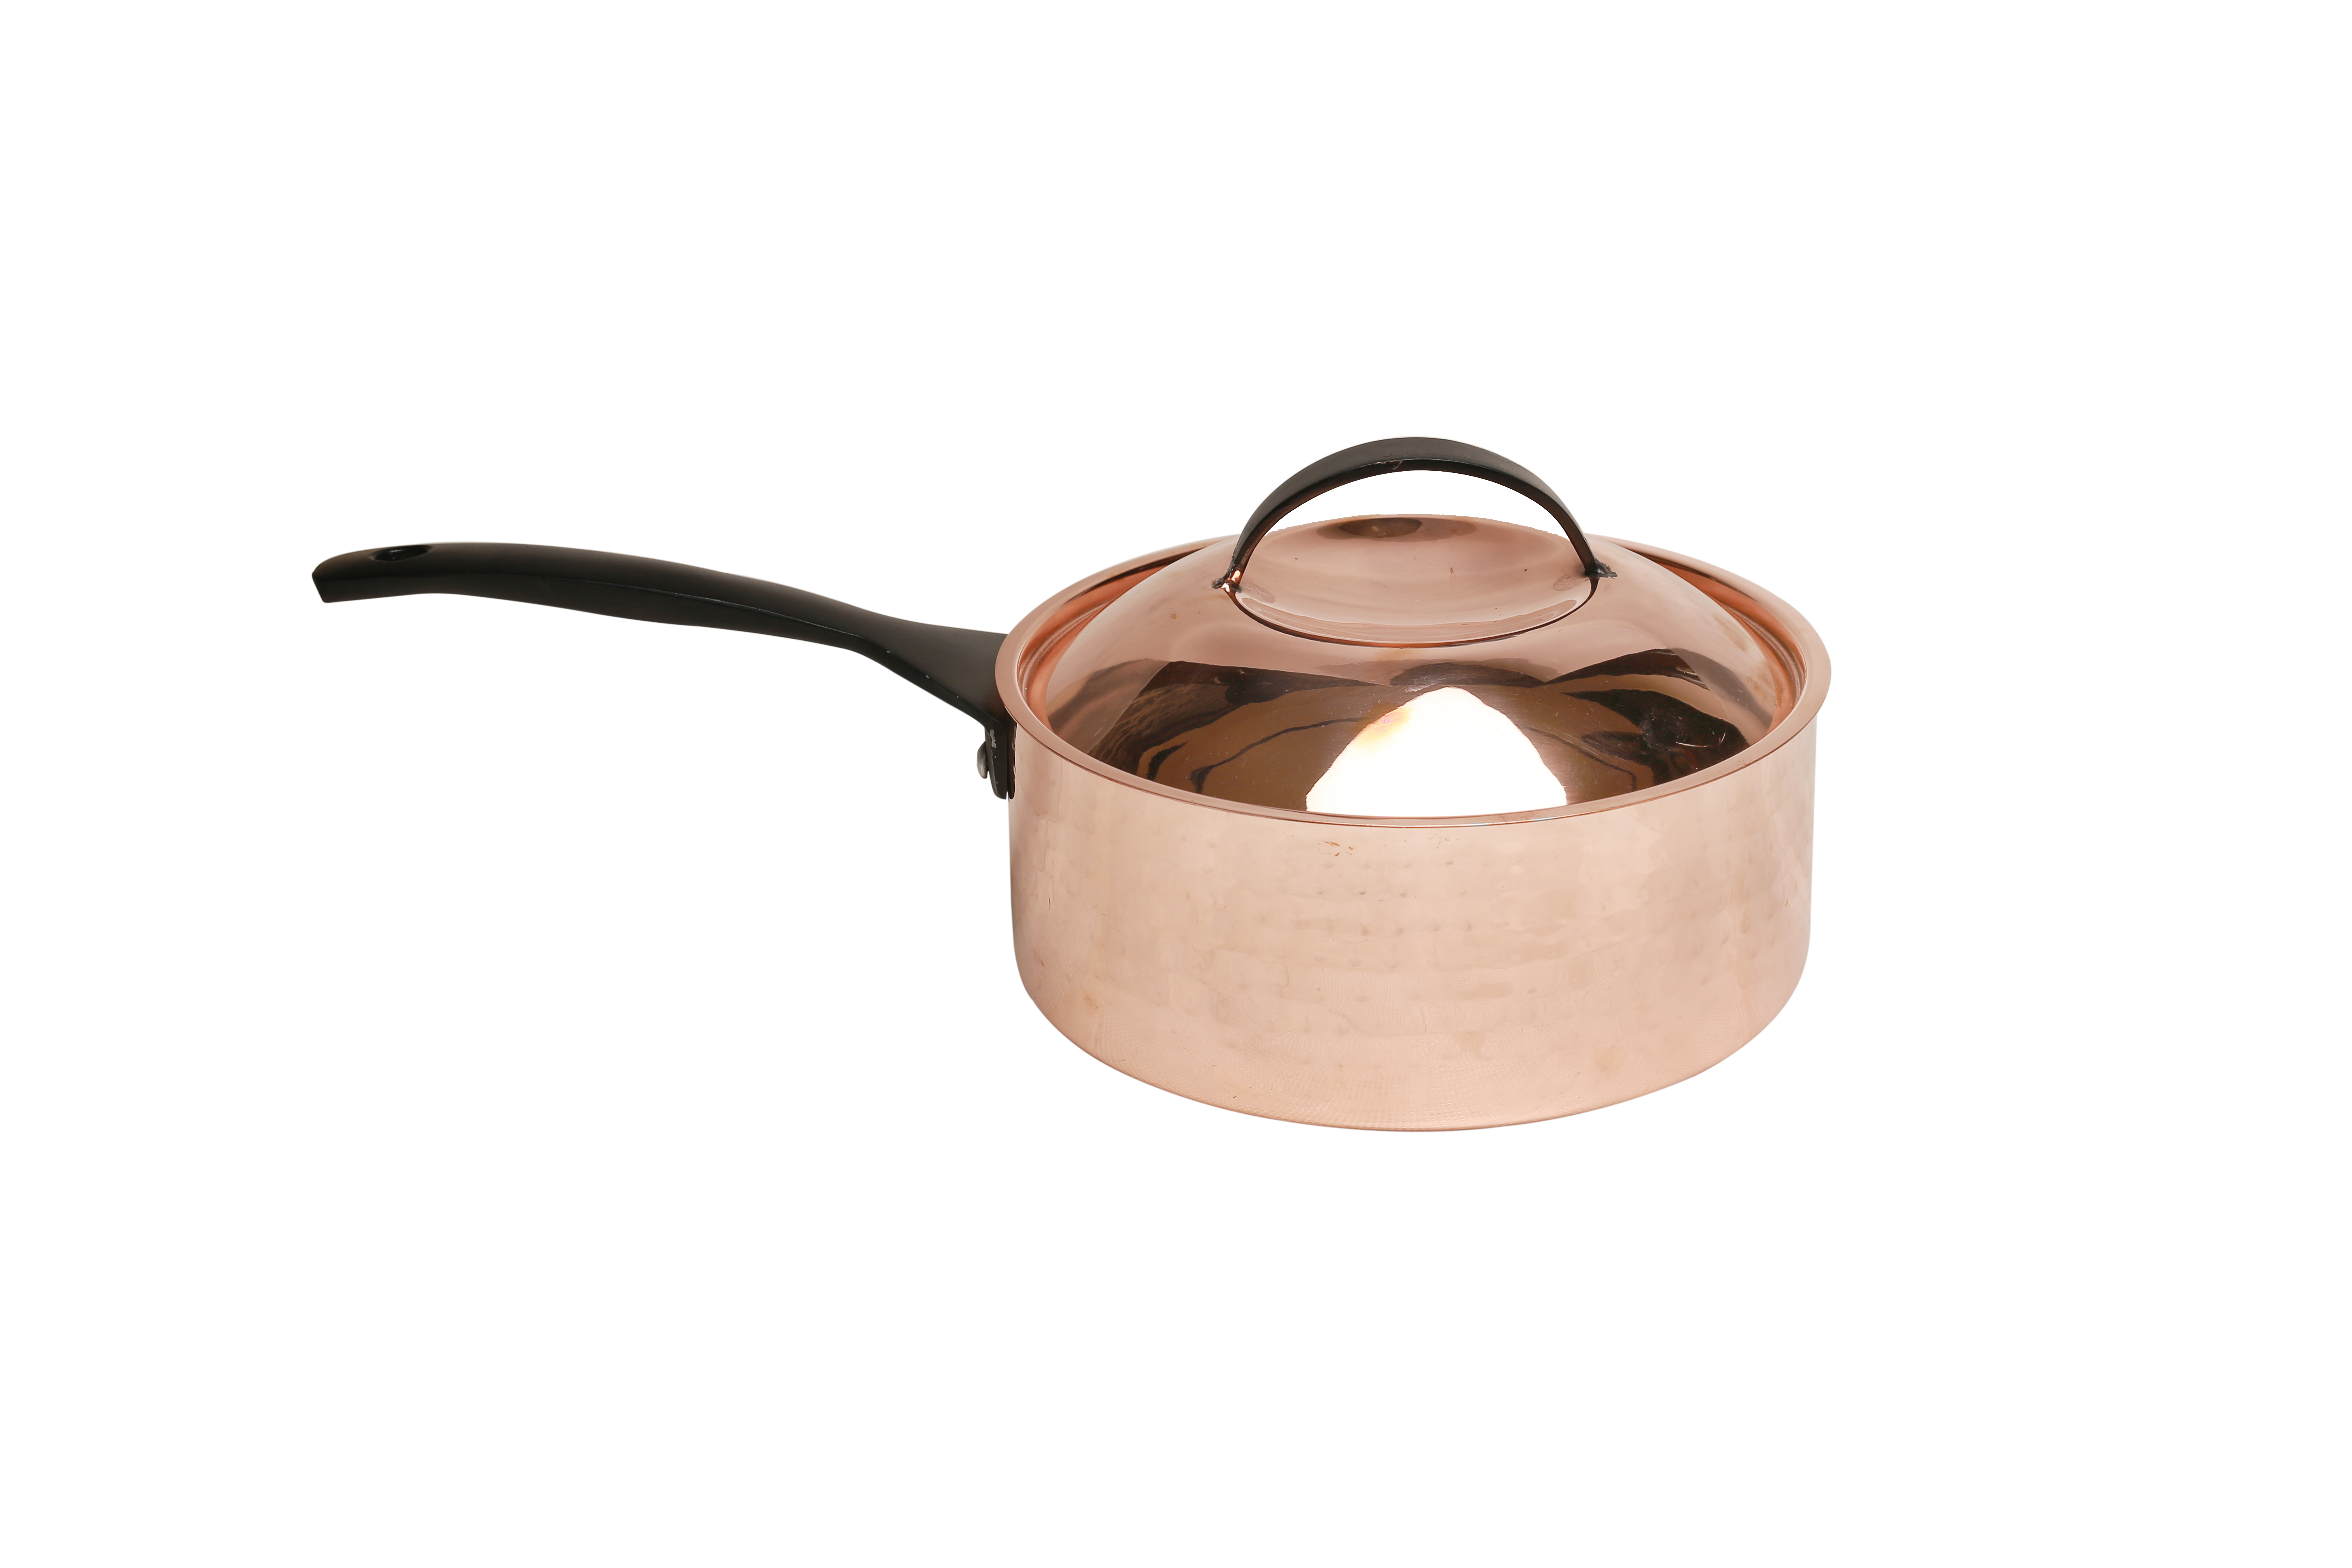 Skyserv Induction Copper Finish Round Sauce Pan